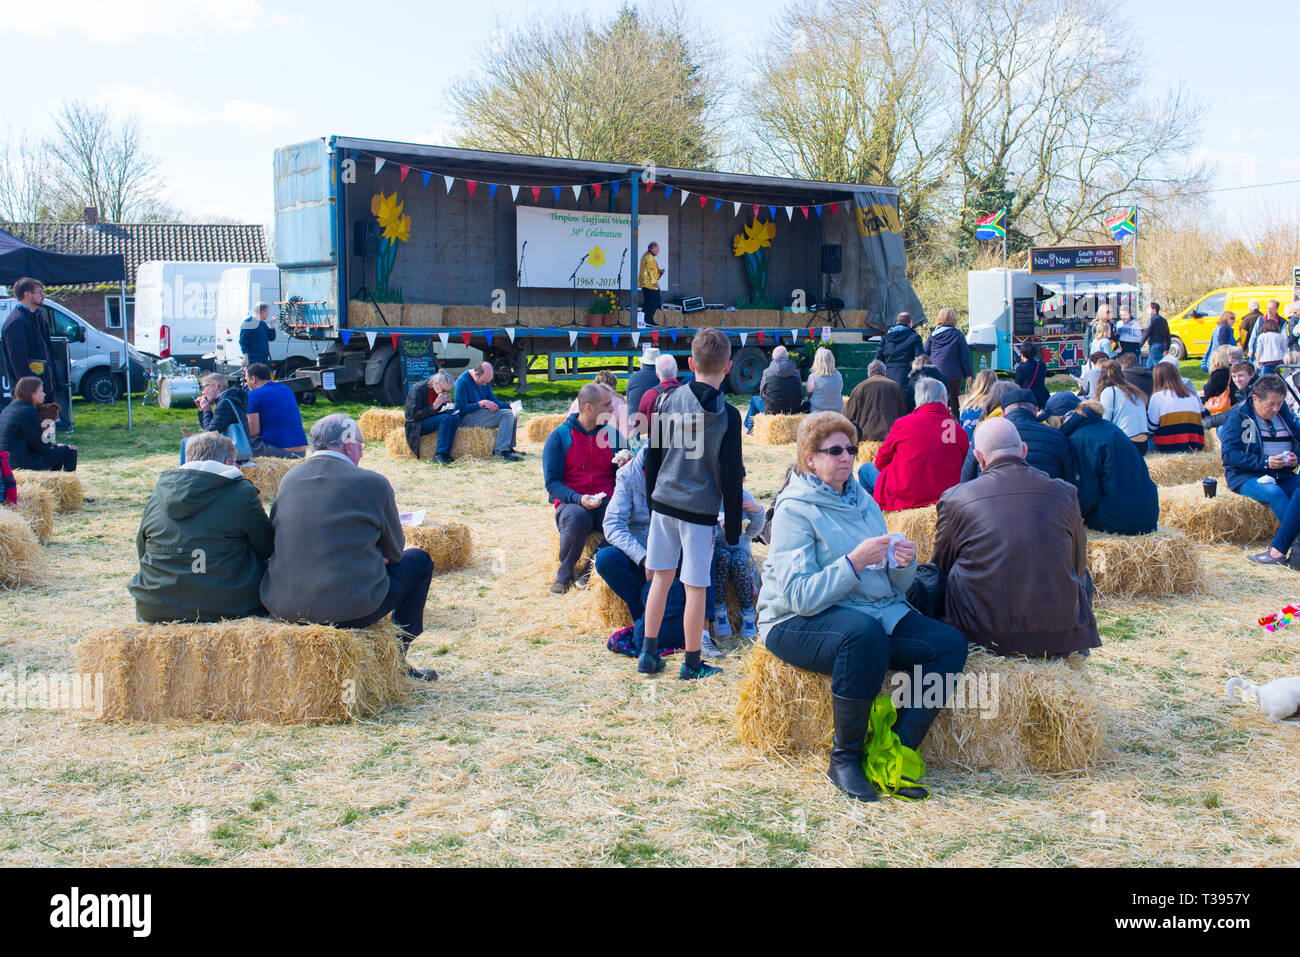 Thriplow, Cambridge, England, UK - March 2019: People attending a local country fair listening to live music sitting on hay bales Stock Photo